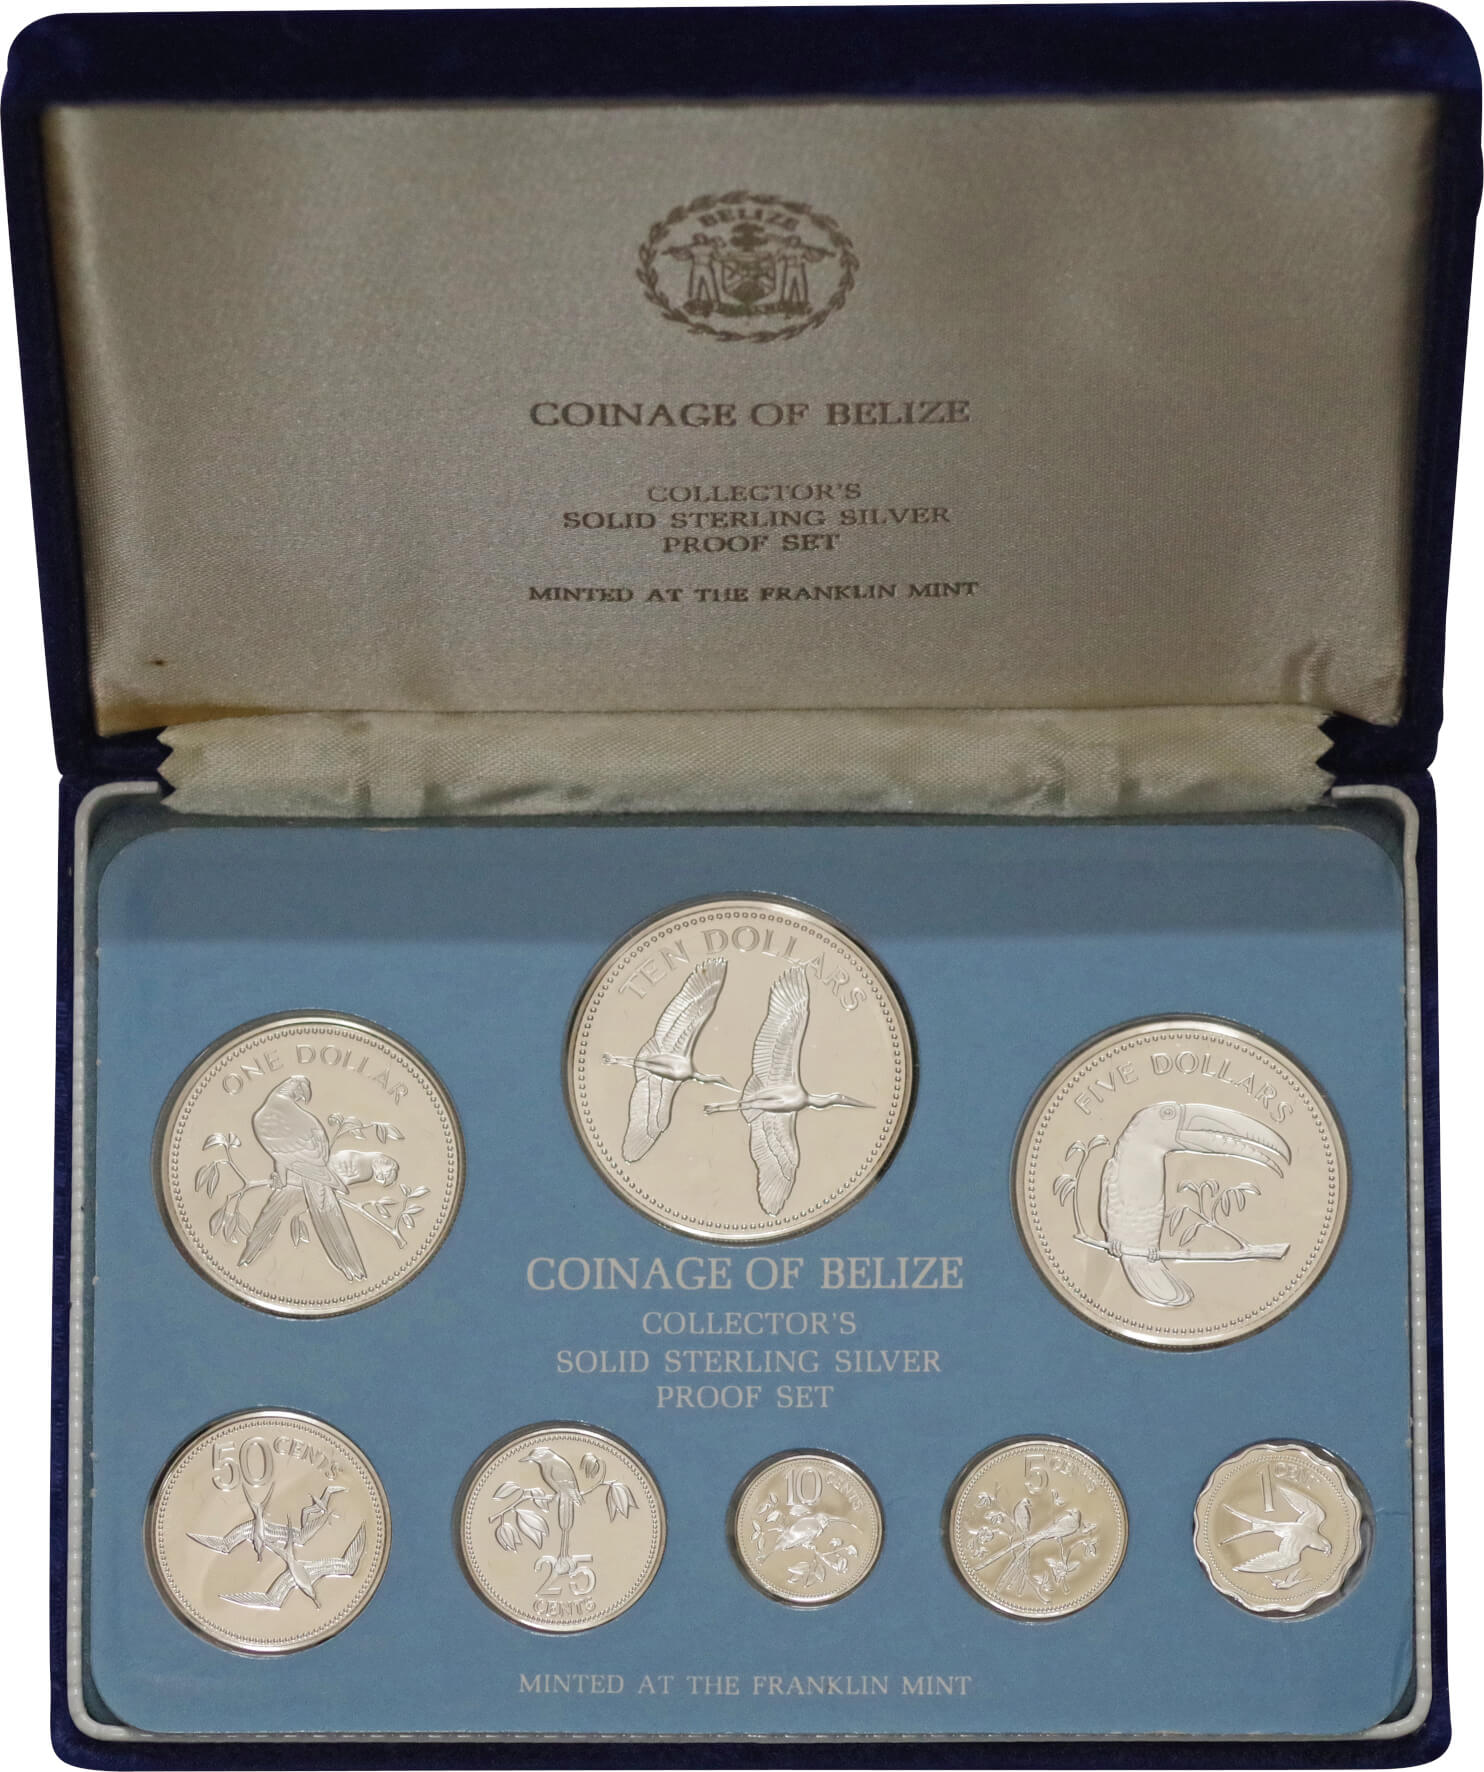 Coinage of Belize proof set 1979